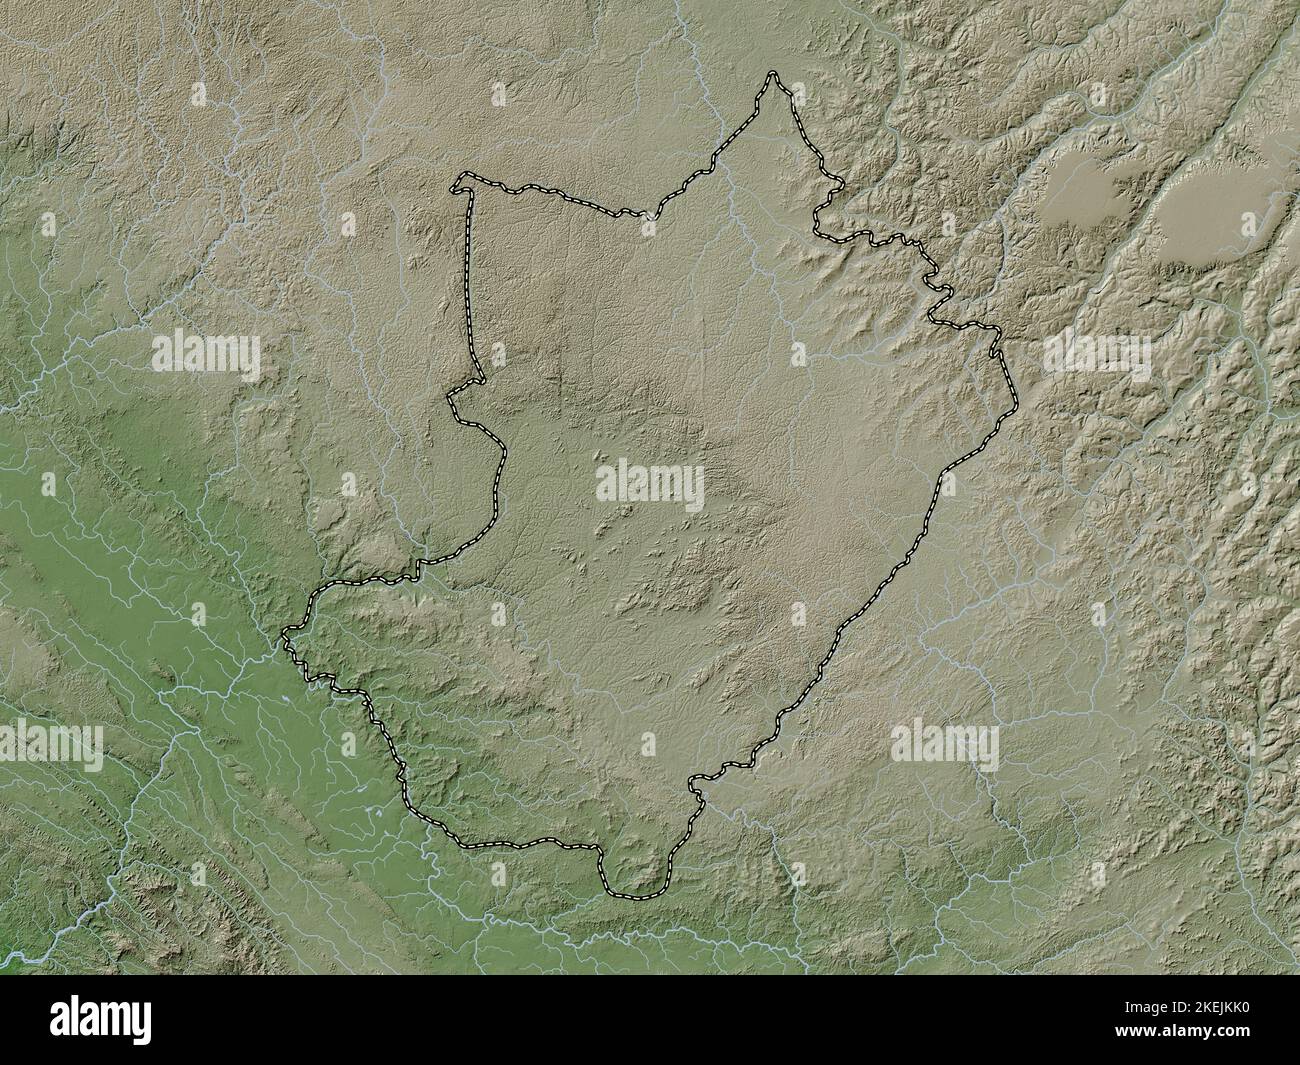 Lekoumou, region of Republic of Congo. Elevation map colored in wiki style with lakes and rivers Stock Photo